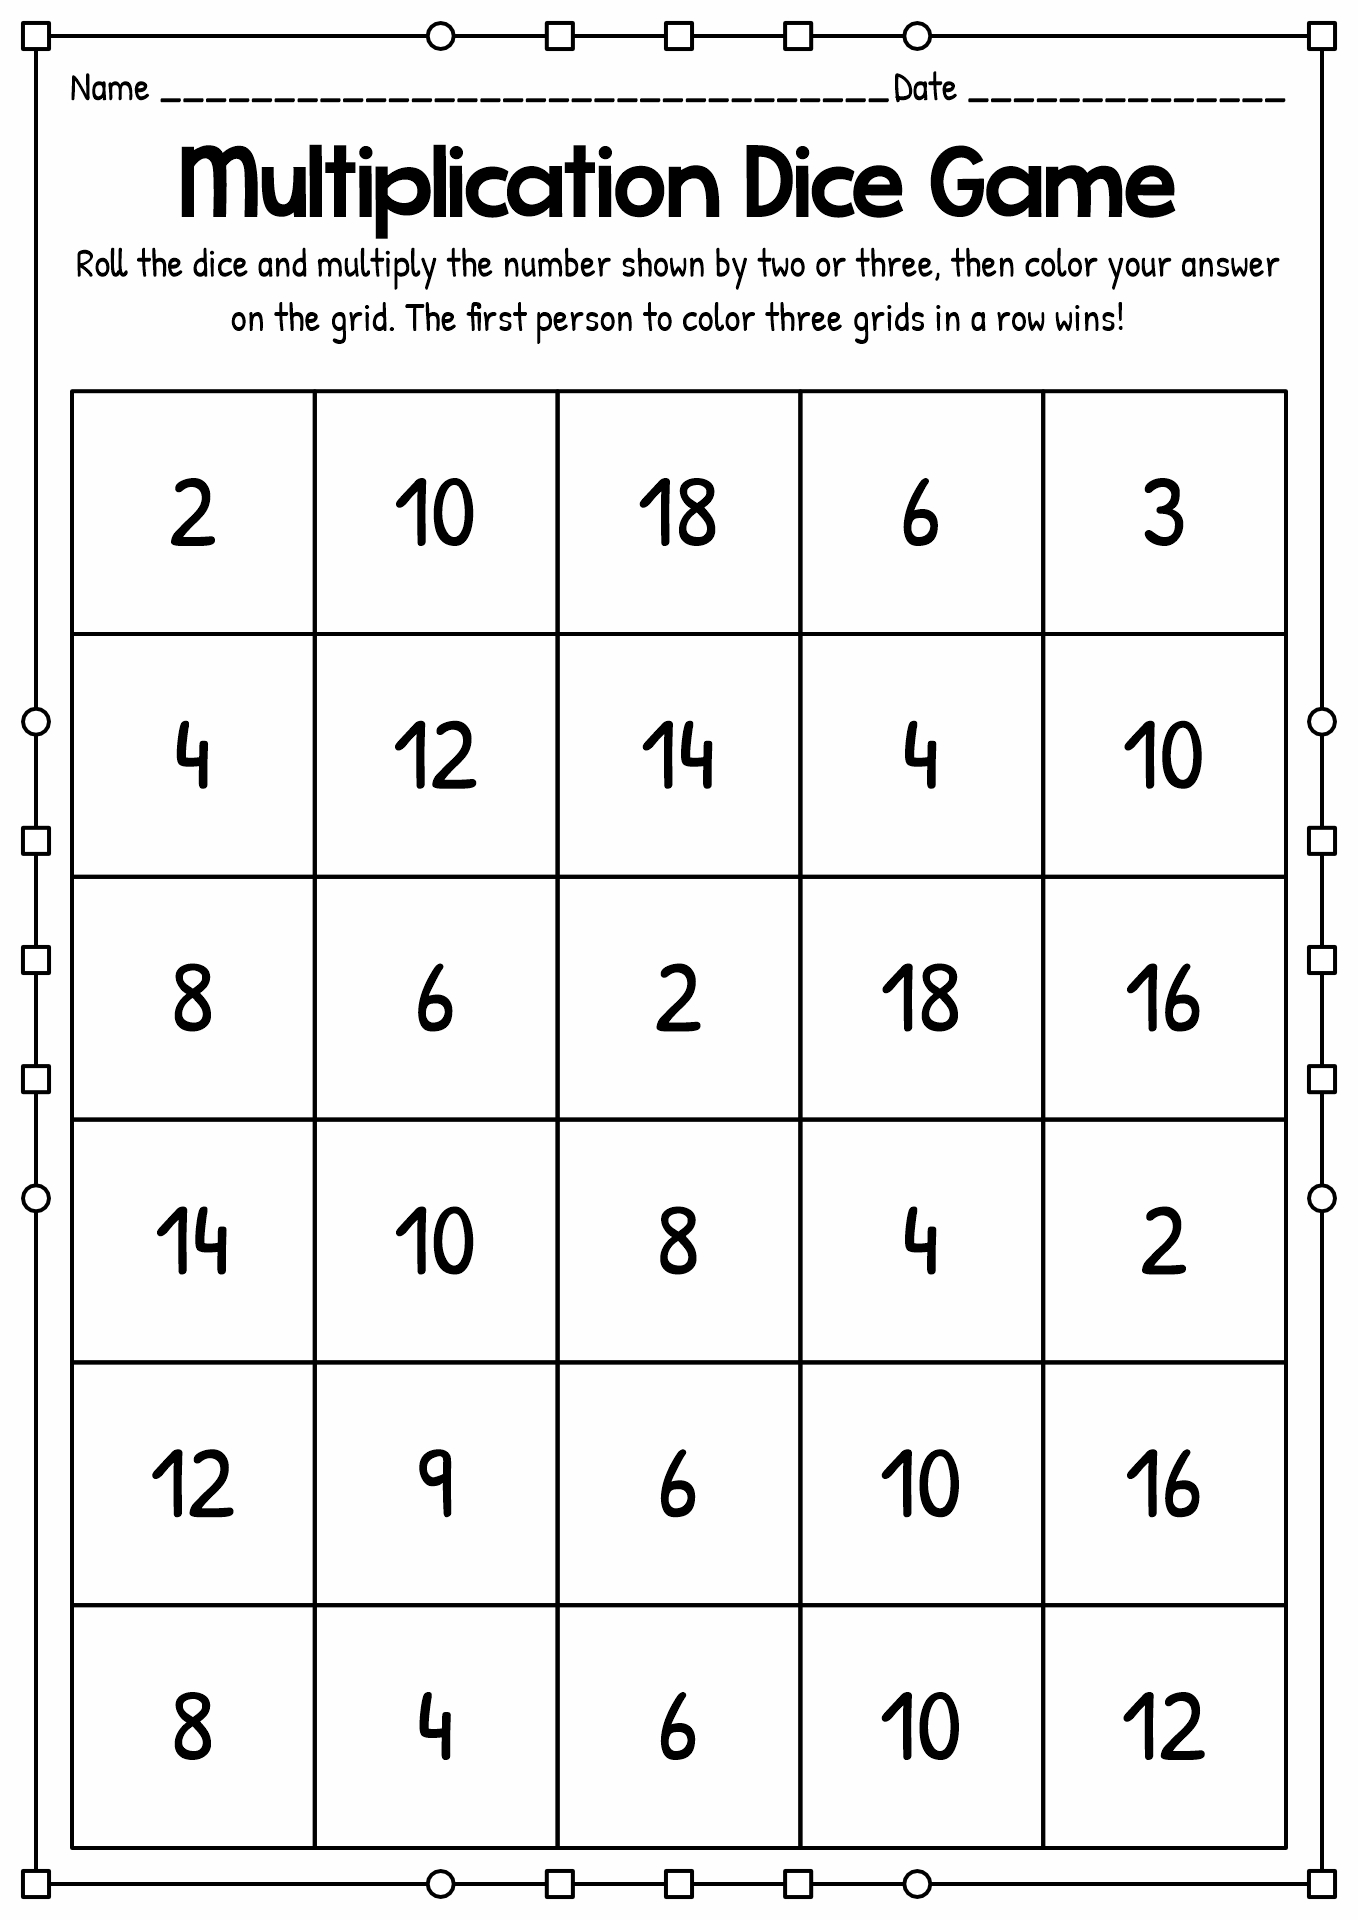 12-best-images-of-dice-math-worksheets-dice-addition-worksheets-addition-and-subtraction-dice